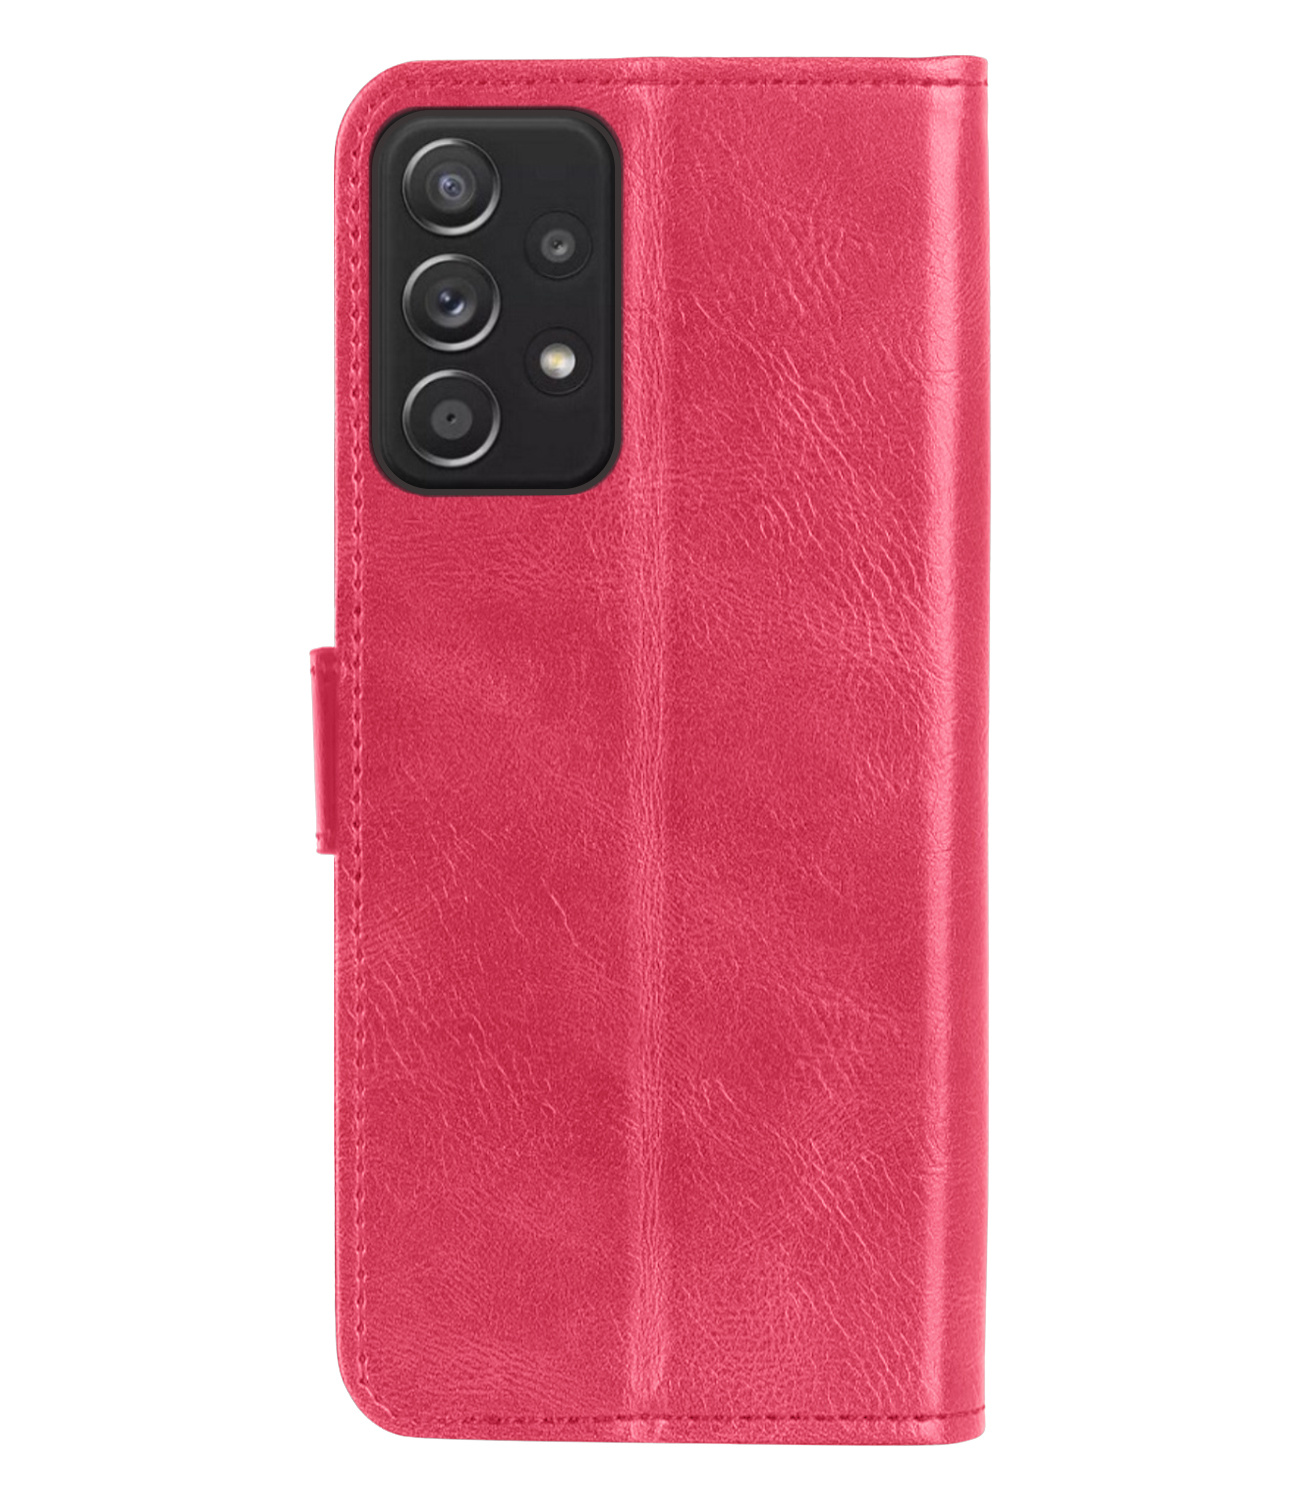 Samsung Galaxy A13 4G Hoes Bookcase Donker Roze - Flipcase Donker Roze - Samsung Galaxy A13 4G Book Cover - Samsung Galaxy A13 4G Hoesje Donker Roze